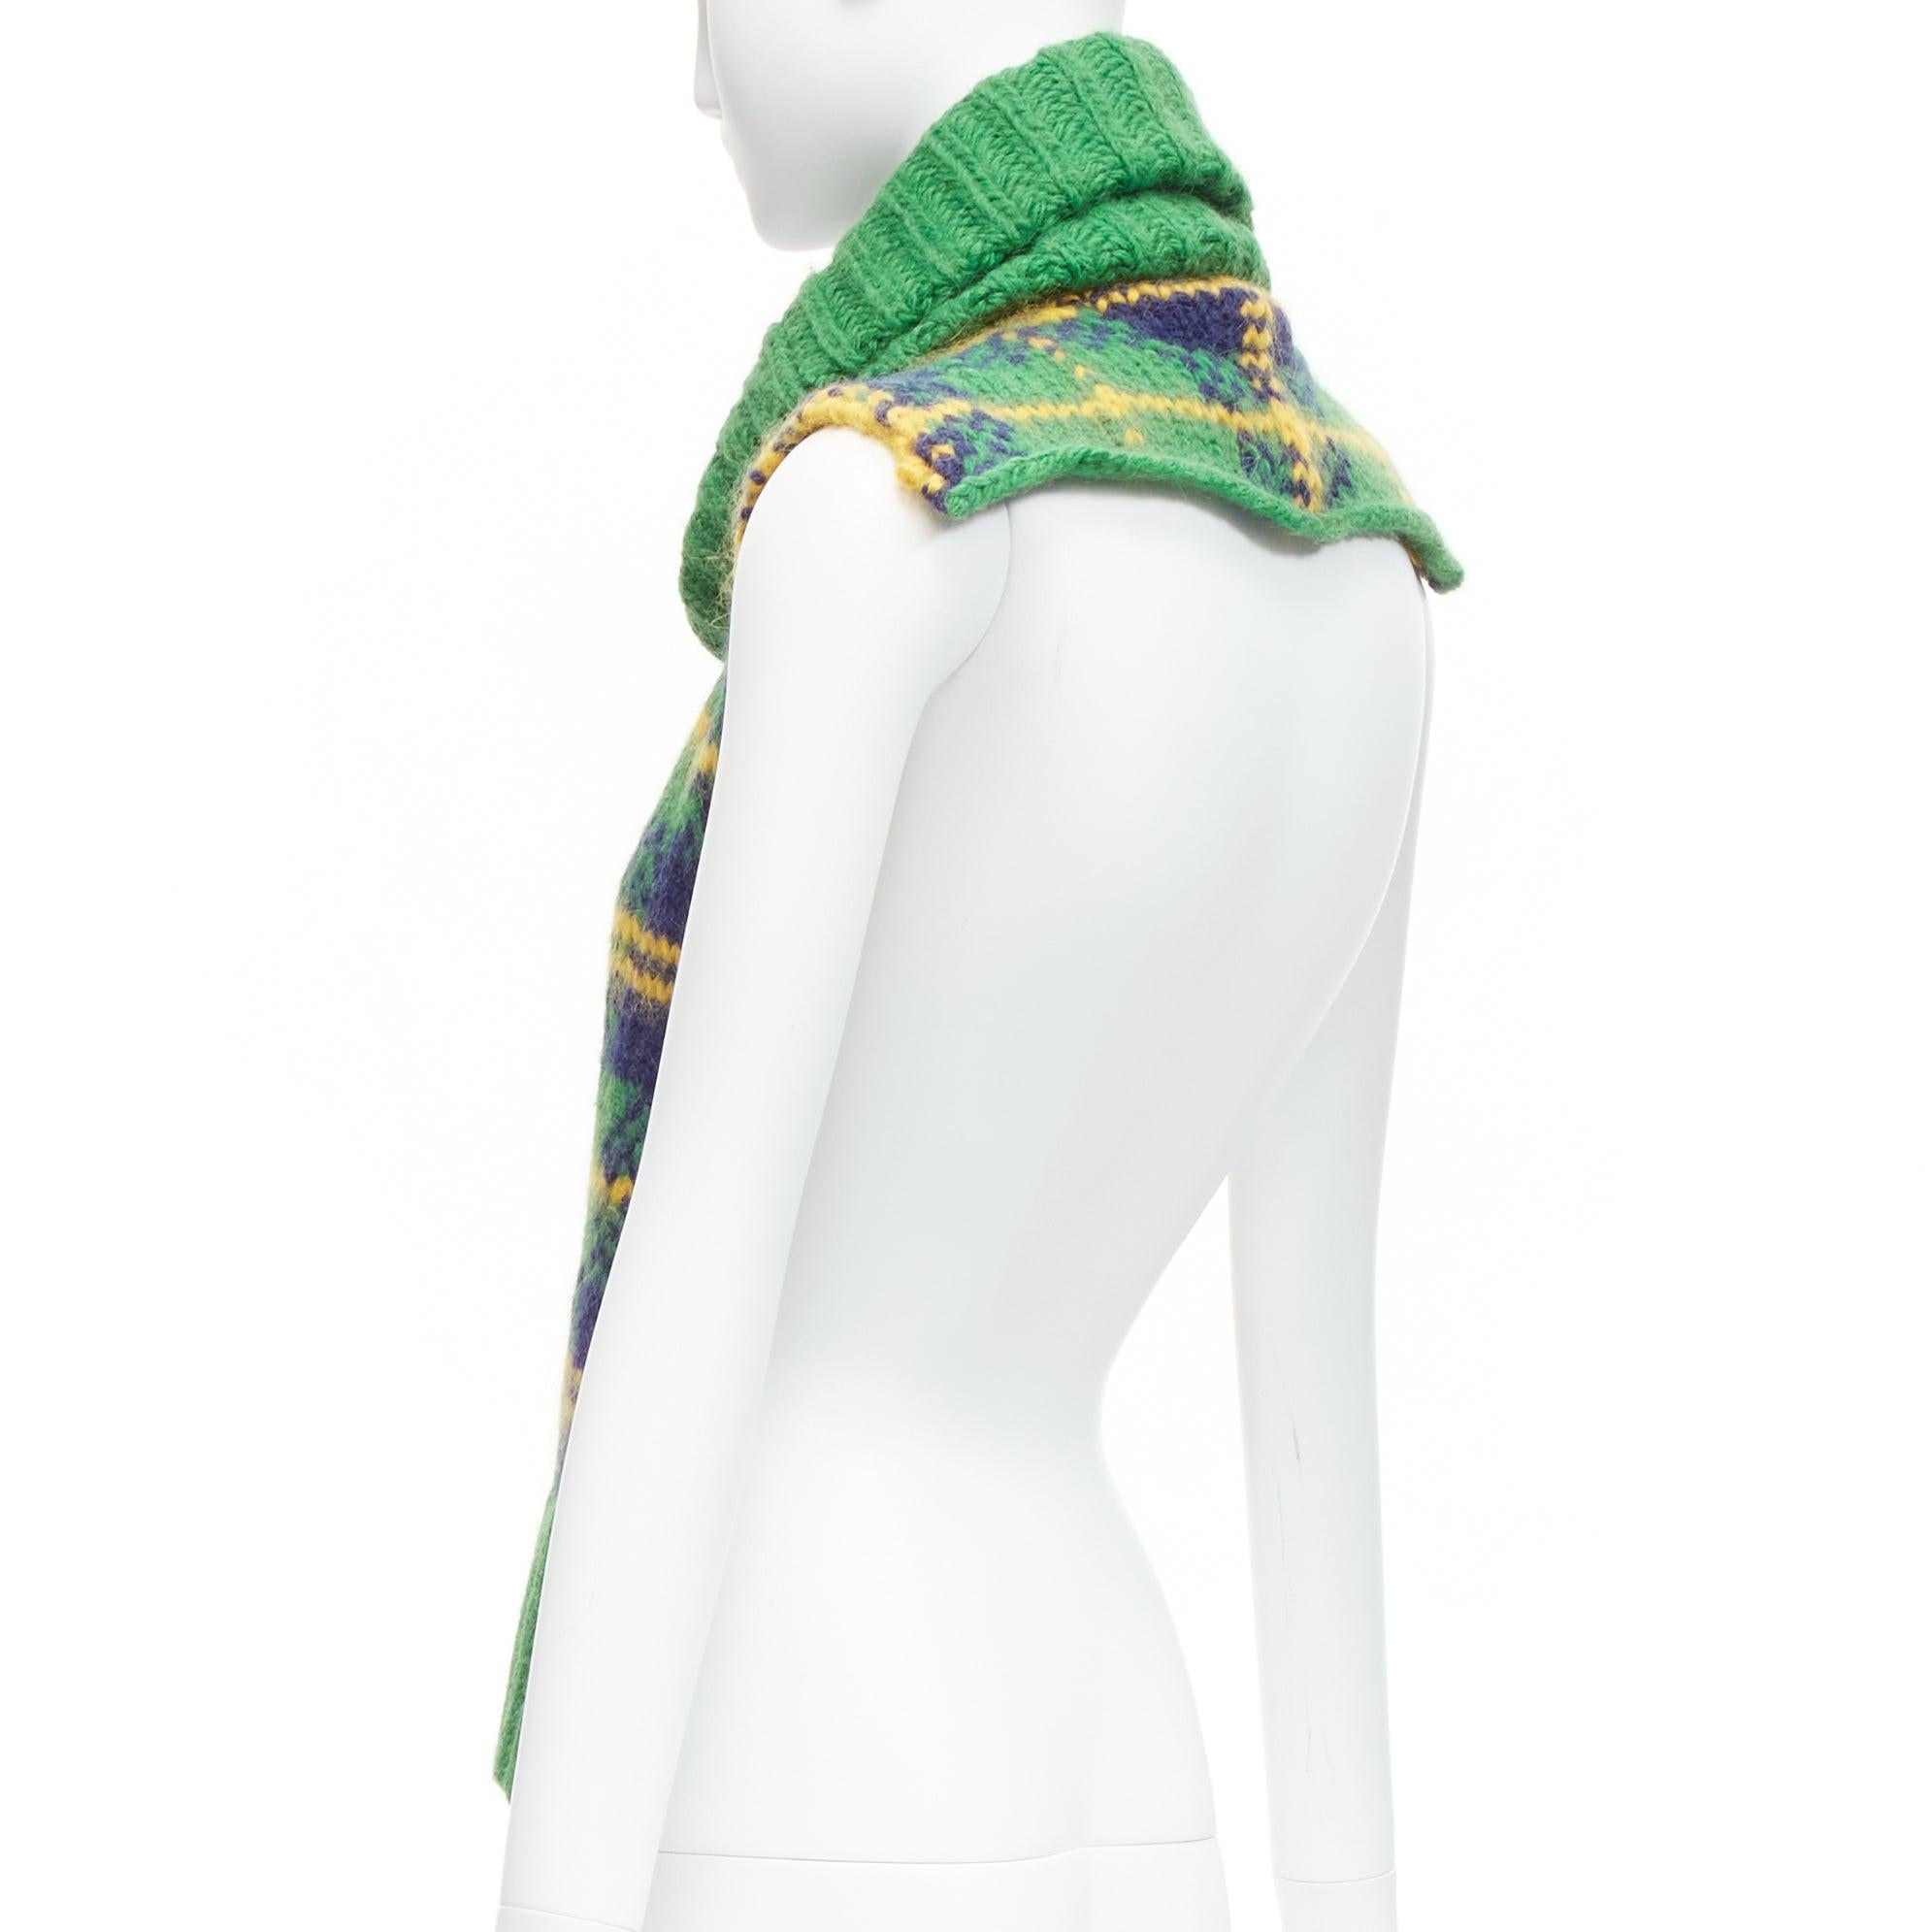 new OLD CELINE Phoebe Philo green yellow plaid check wool blend turtleneck vest dickie scarf
Reference: TGAS/D00465
Brand: Celine
Designer: Phoebe Philo
Material: Wool, Blend
Color: Green, Yellow
Pattern: Checkered
Closure: Slip On
Extra Details: